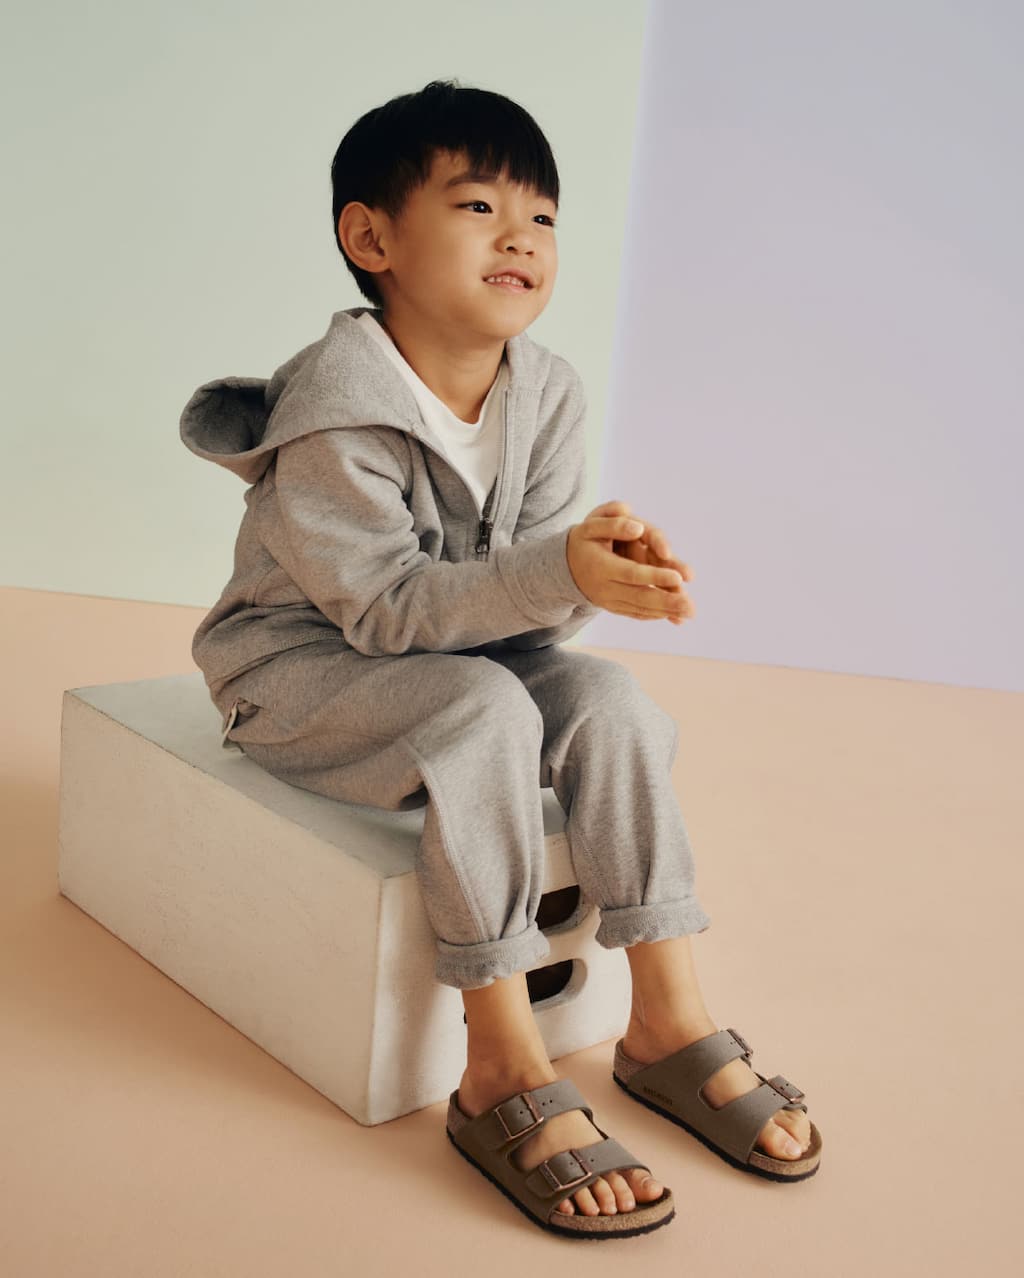 Kids' Shoes | Boots, Sneakers & Sandals For Children | Dsw